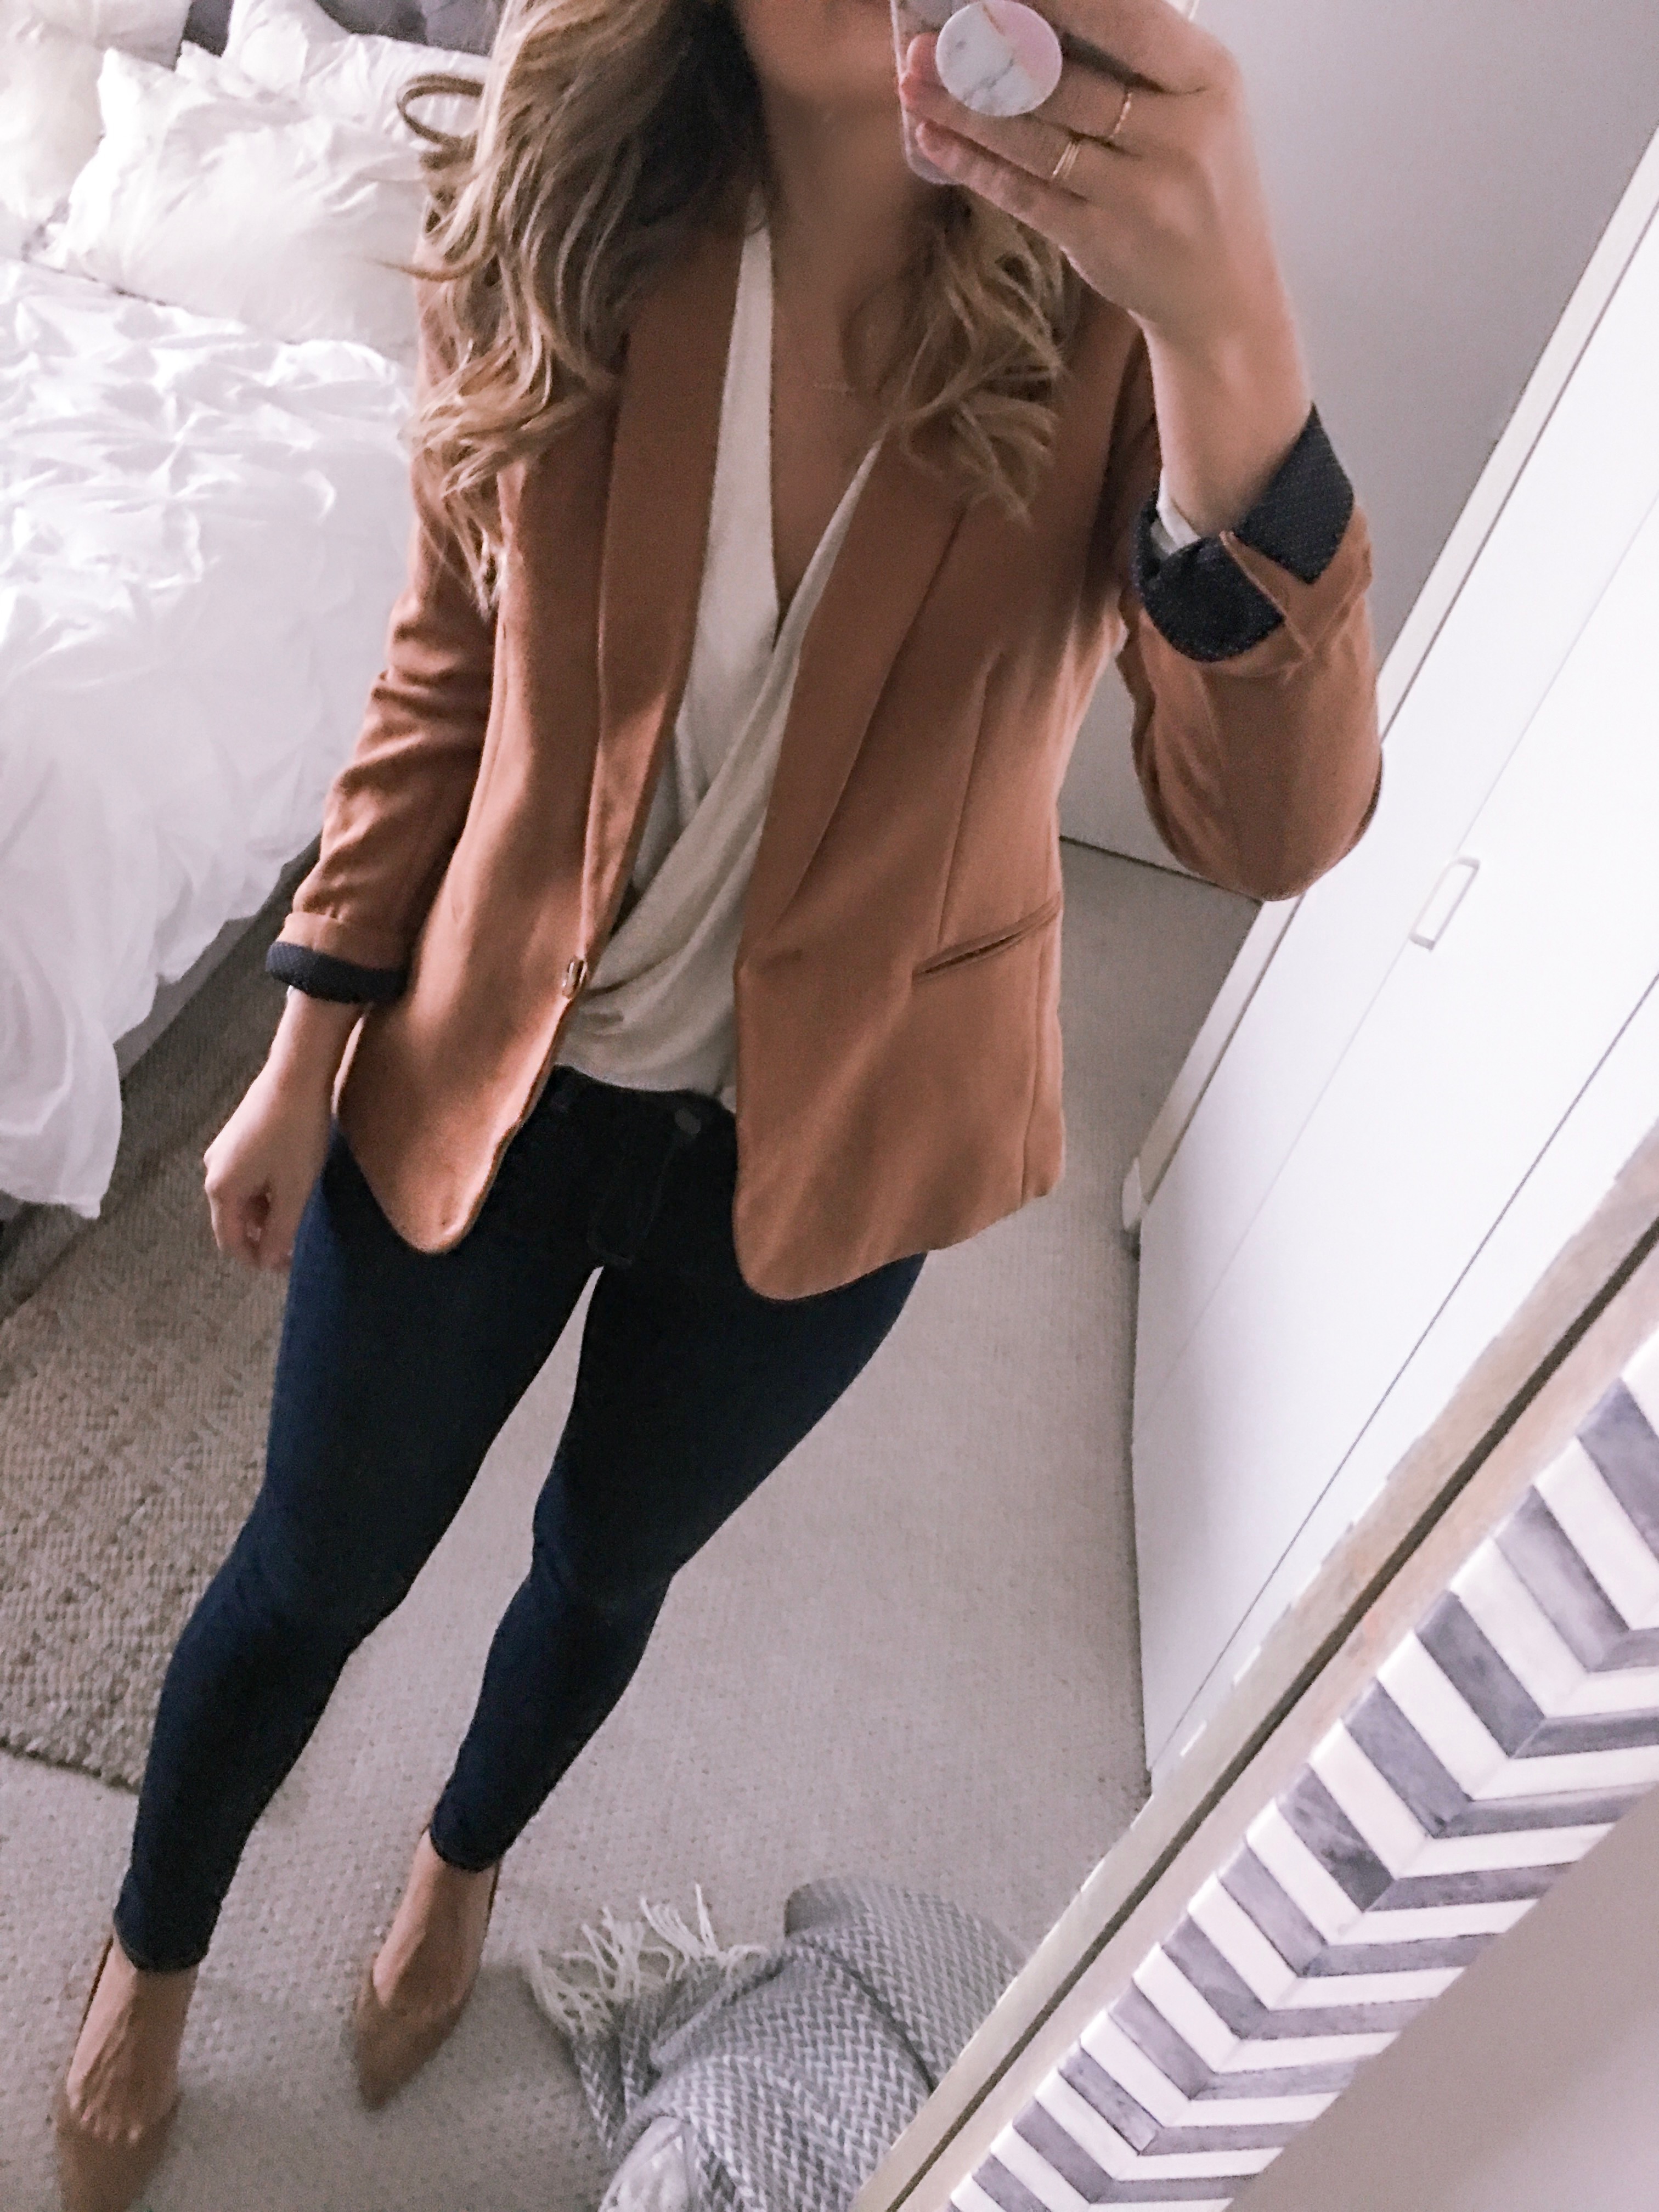 J.Crew Parke Blazer in caramel and a white faux wrap top